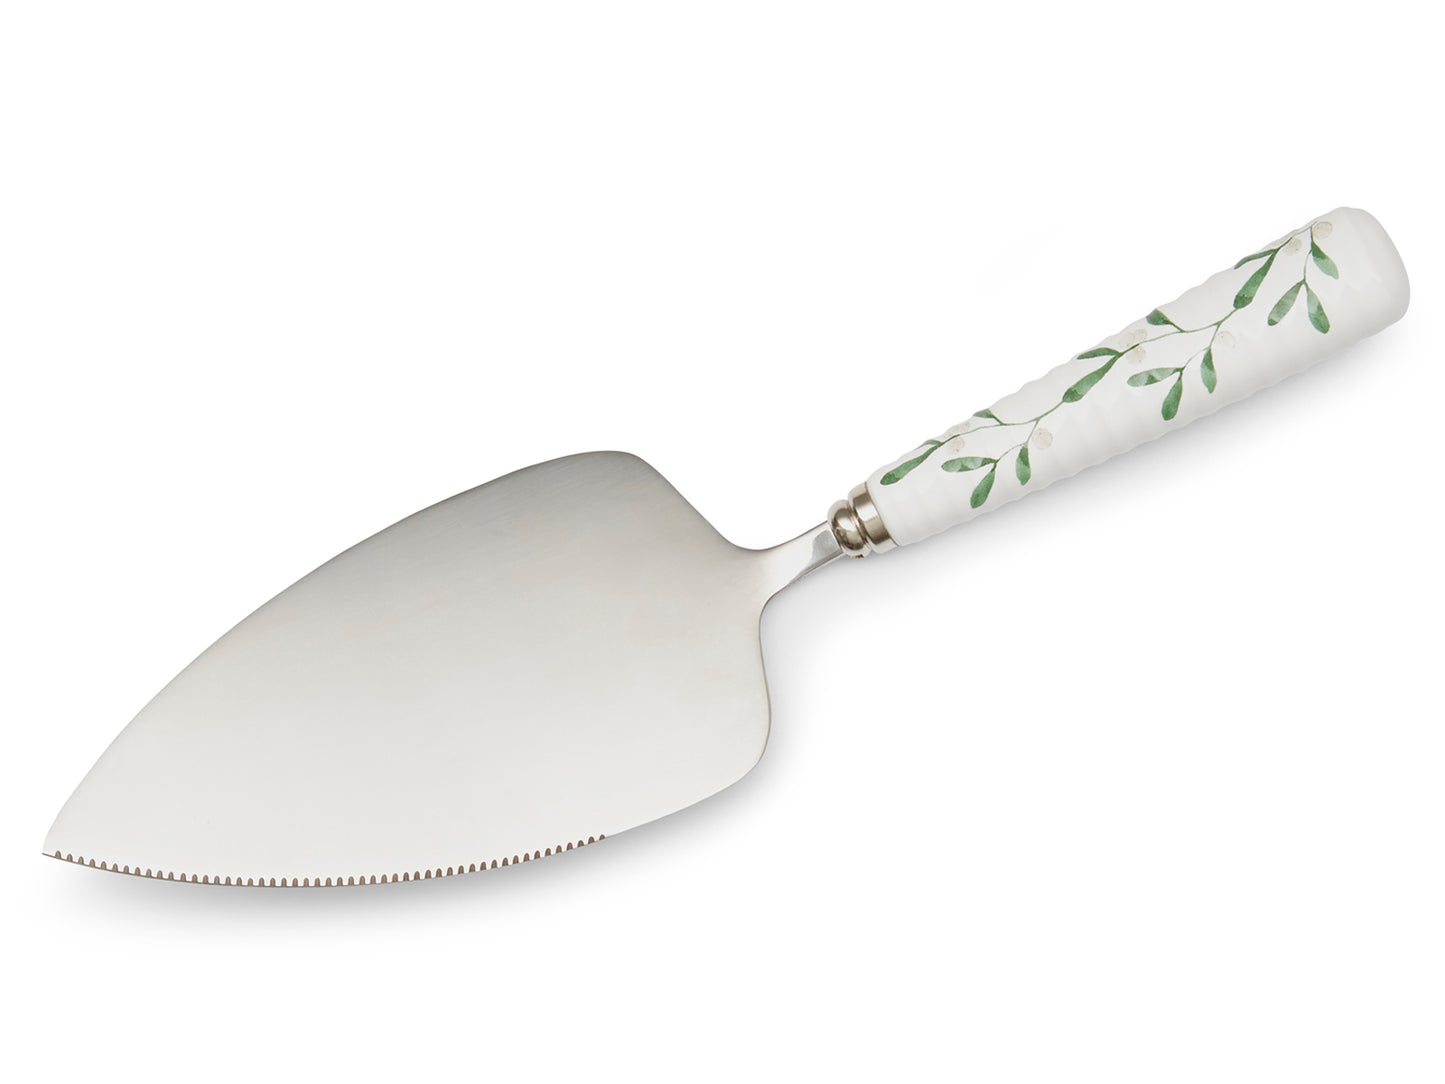 Part of Sophie Conran's Mistletoe range, this festive cake slice has a white porcelain handle that has been designed with Sophie's textured ripple effect and printed with a string of mistletoe. The slice itself is stainless steel and has a serrated edge that is perfect for slicing up a fruit cake to enjoy as a Christmas day dessert.